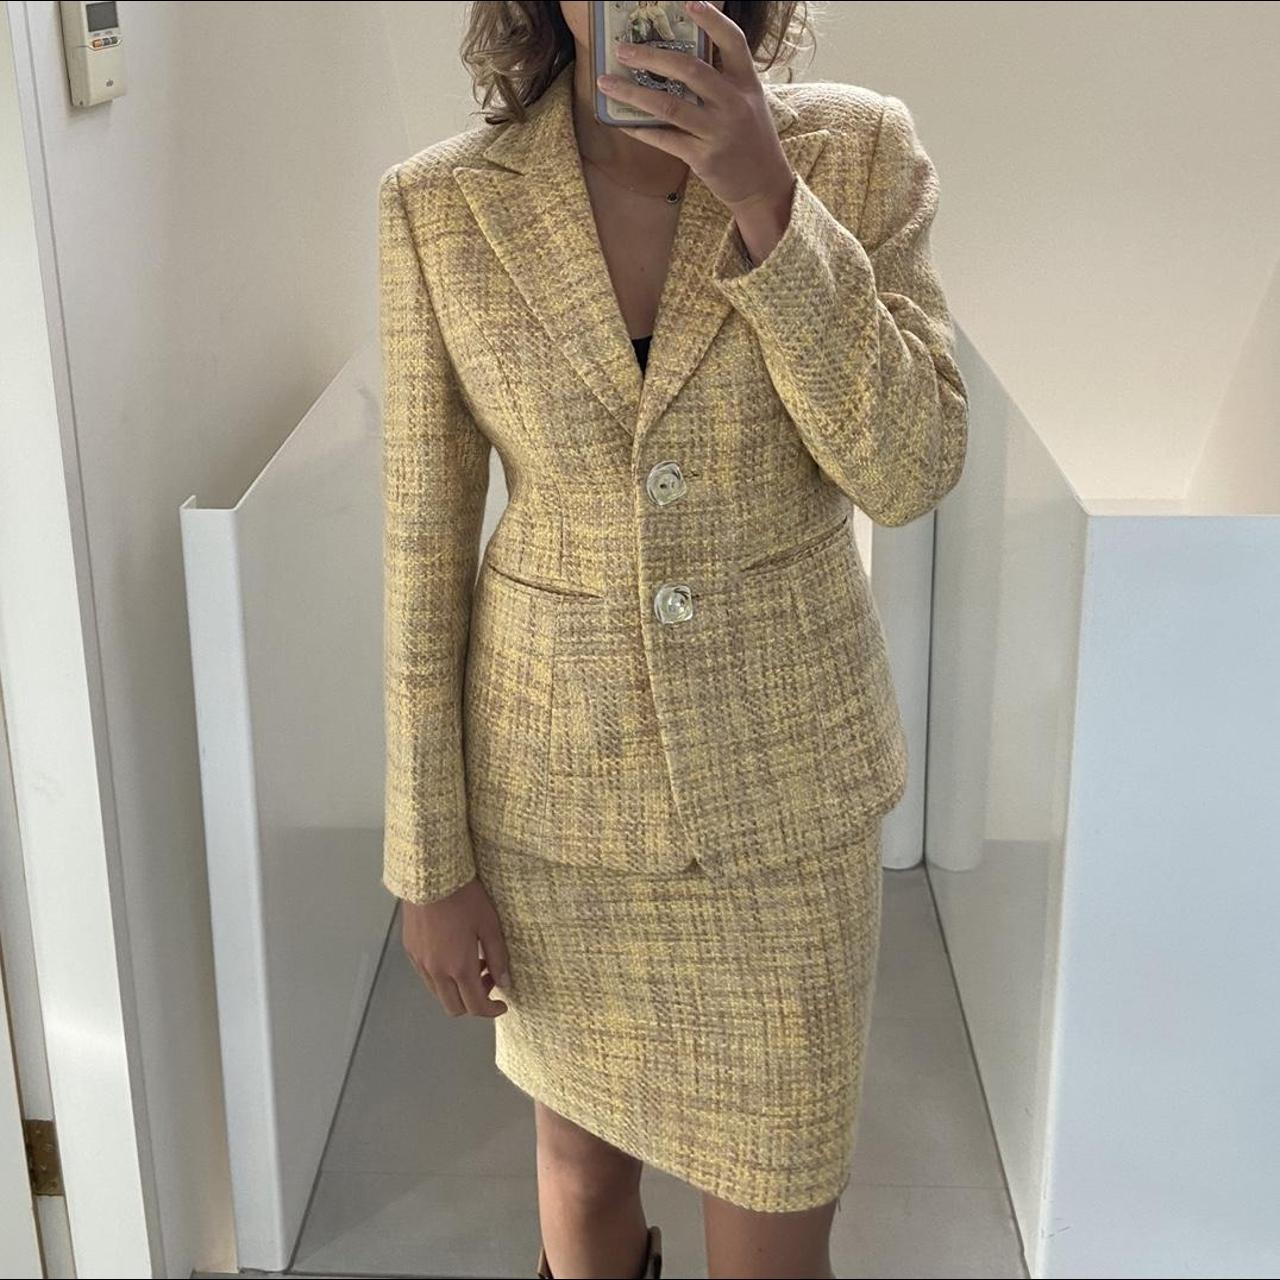 ‘Fashion’ vintage yellow co-ord skirt suit 💛 Great... - Depop